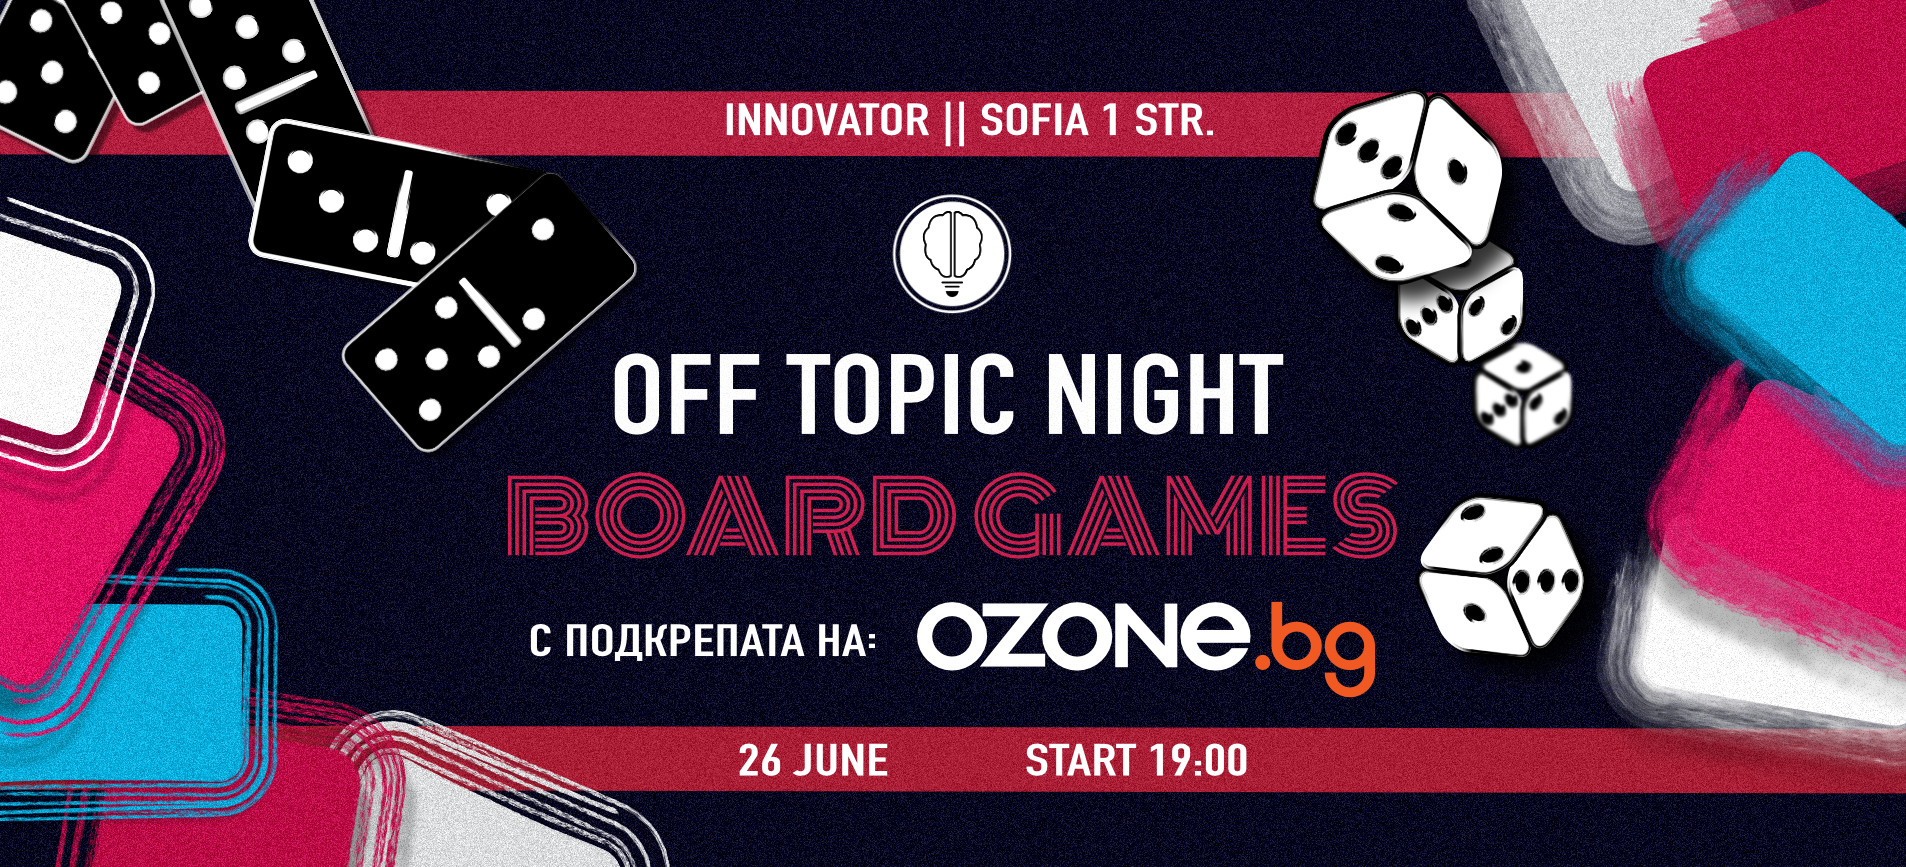 OFF Topic | Board Games Night 20 | Innovator Coworking Space